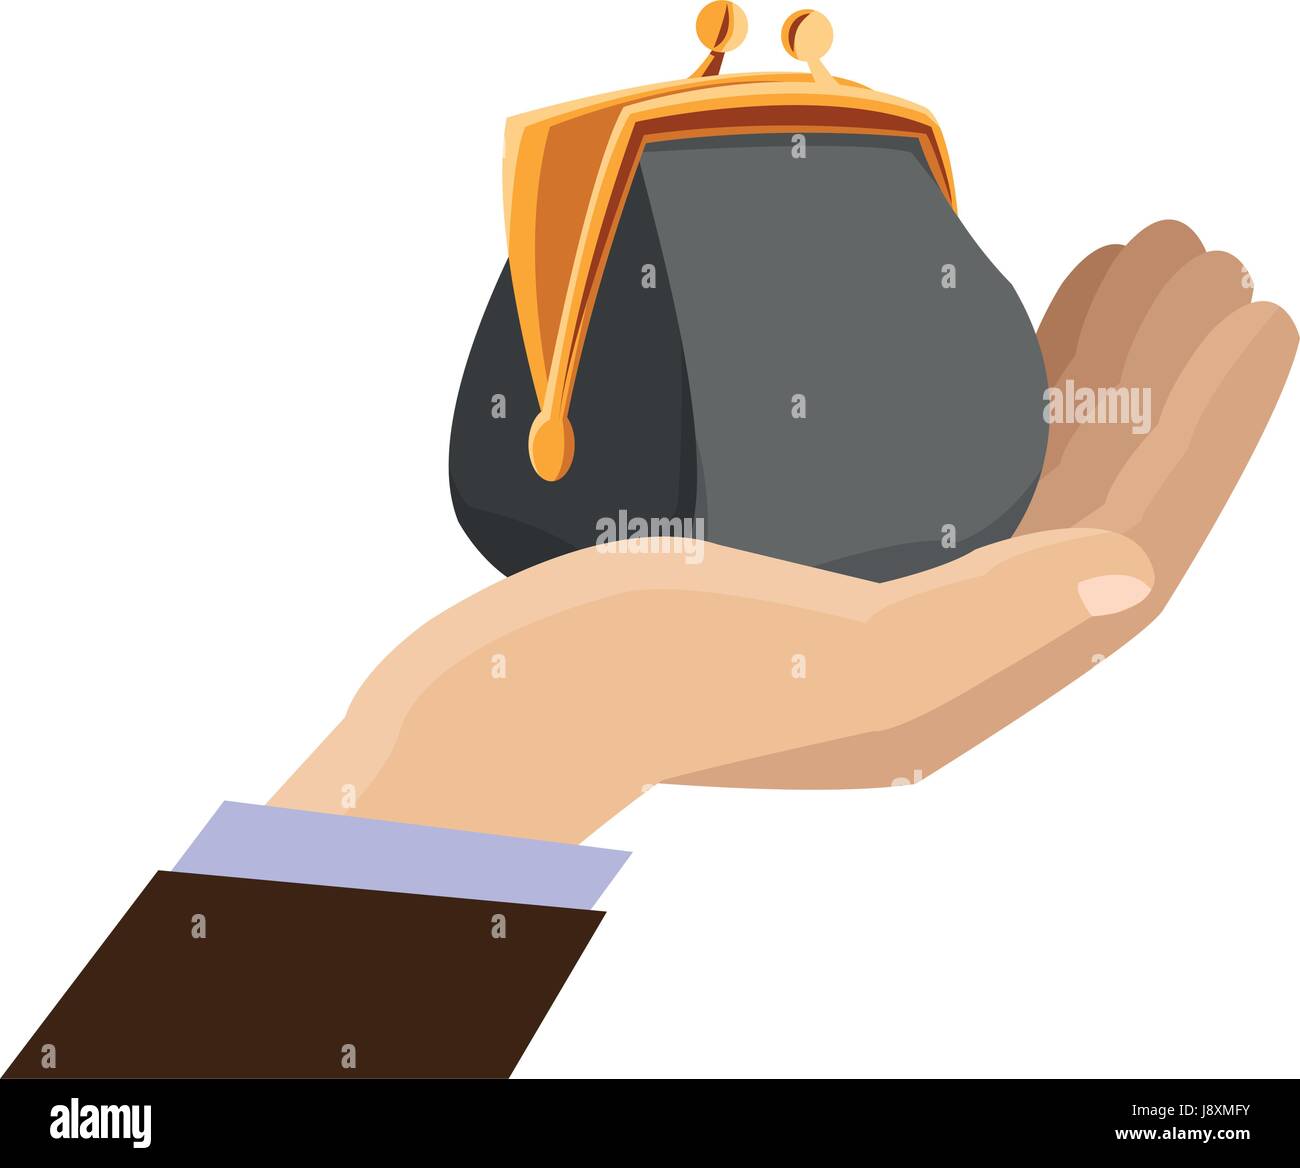 Man Holding Empty Wallet Stock Illustrations – 212 Man Holding Empty Wallet  Stock Illustrations, Vectors & Clipart - Dreamstime